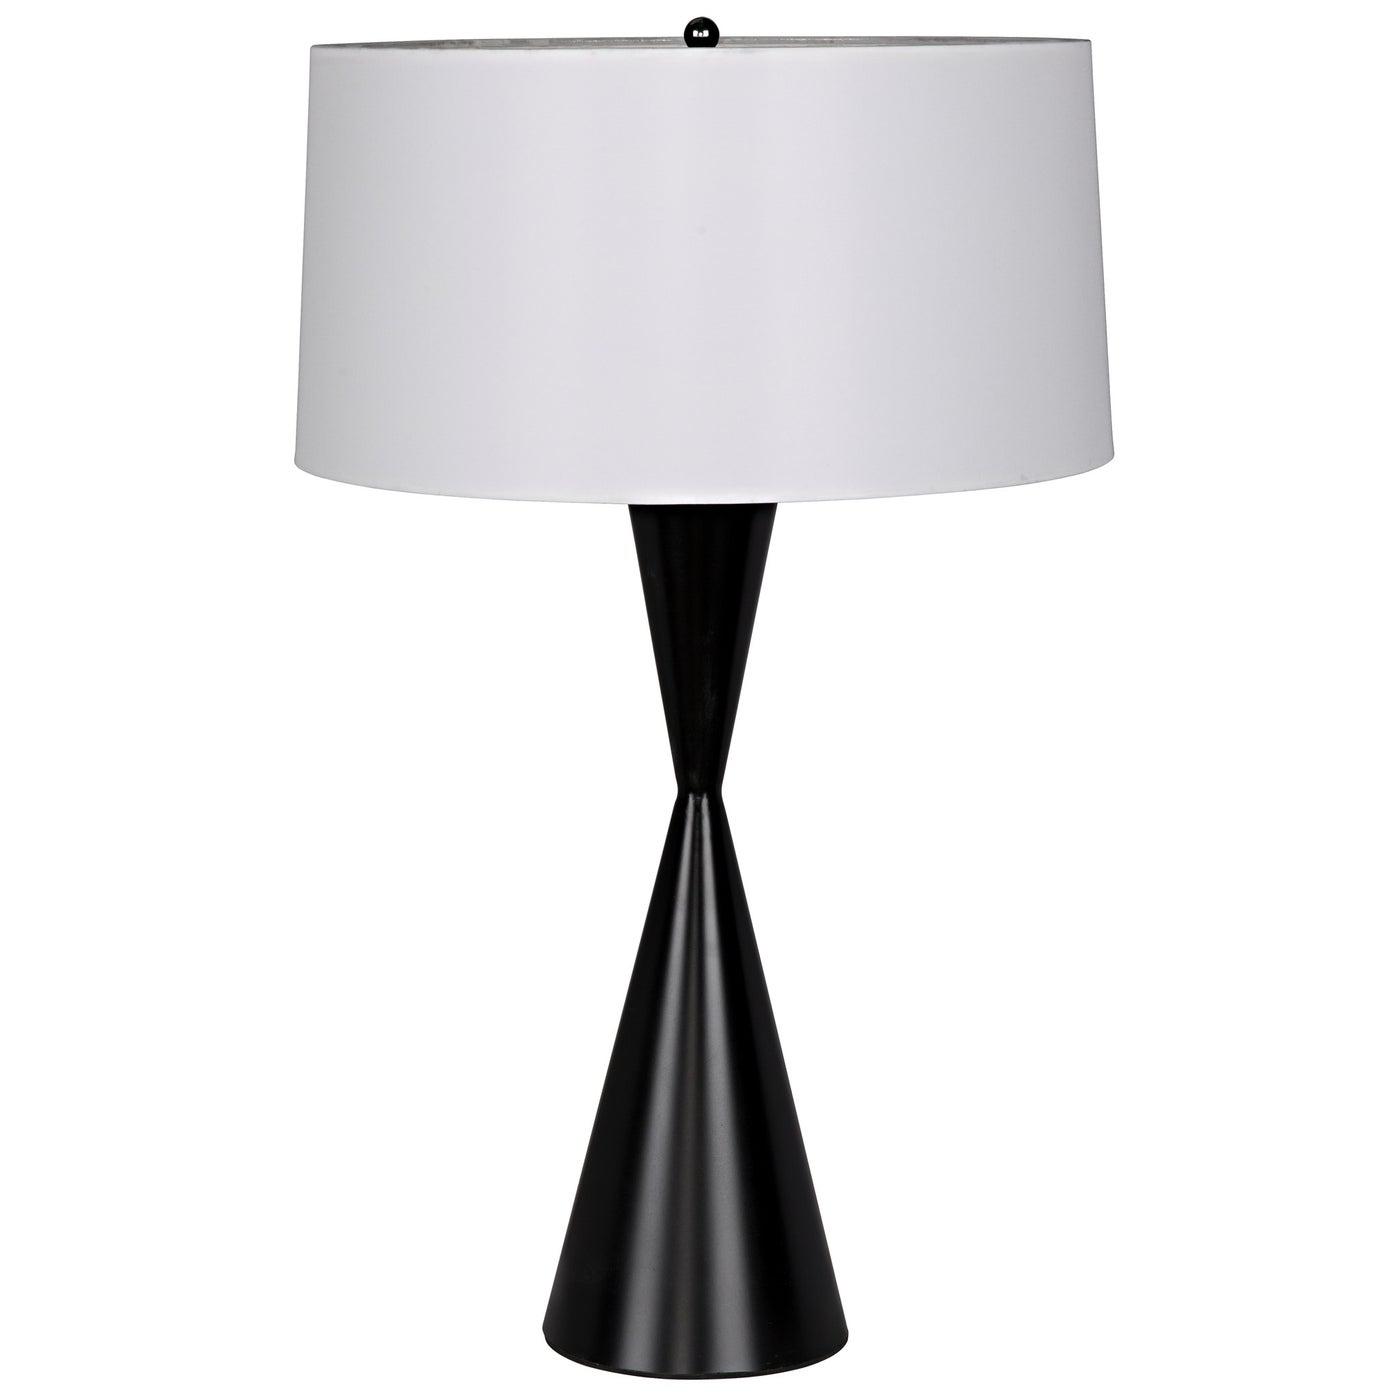 Noble Table Lamp with Shade, Black Steel-Noir Furniture-Blue Hand Home